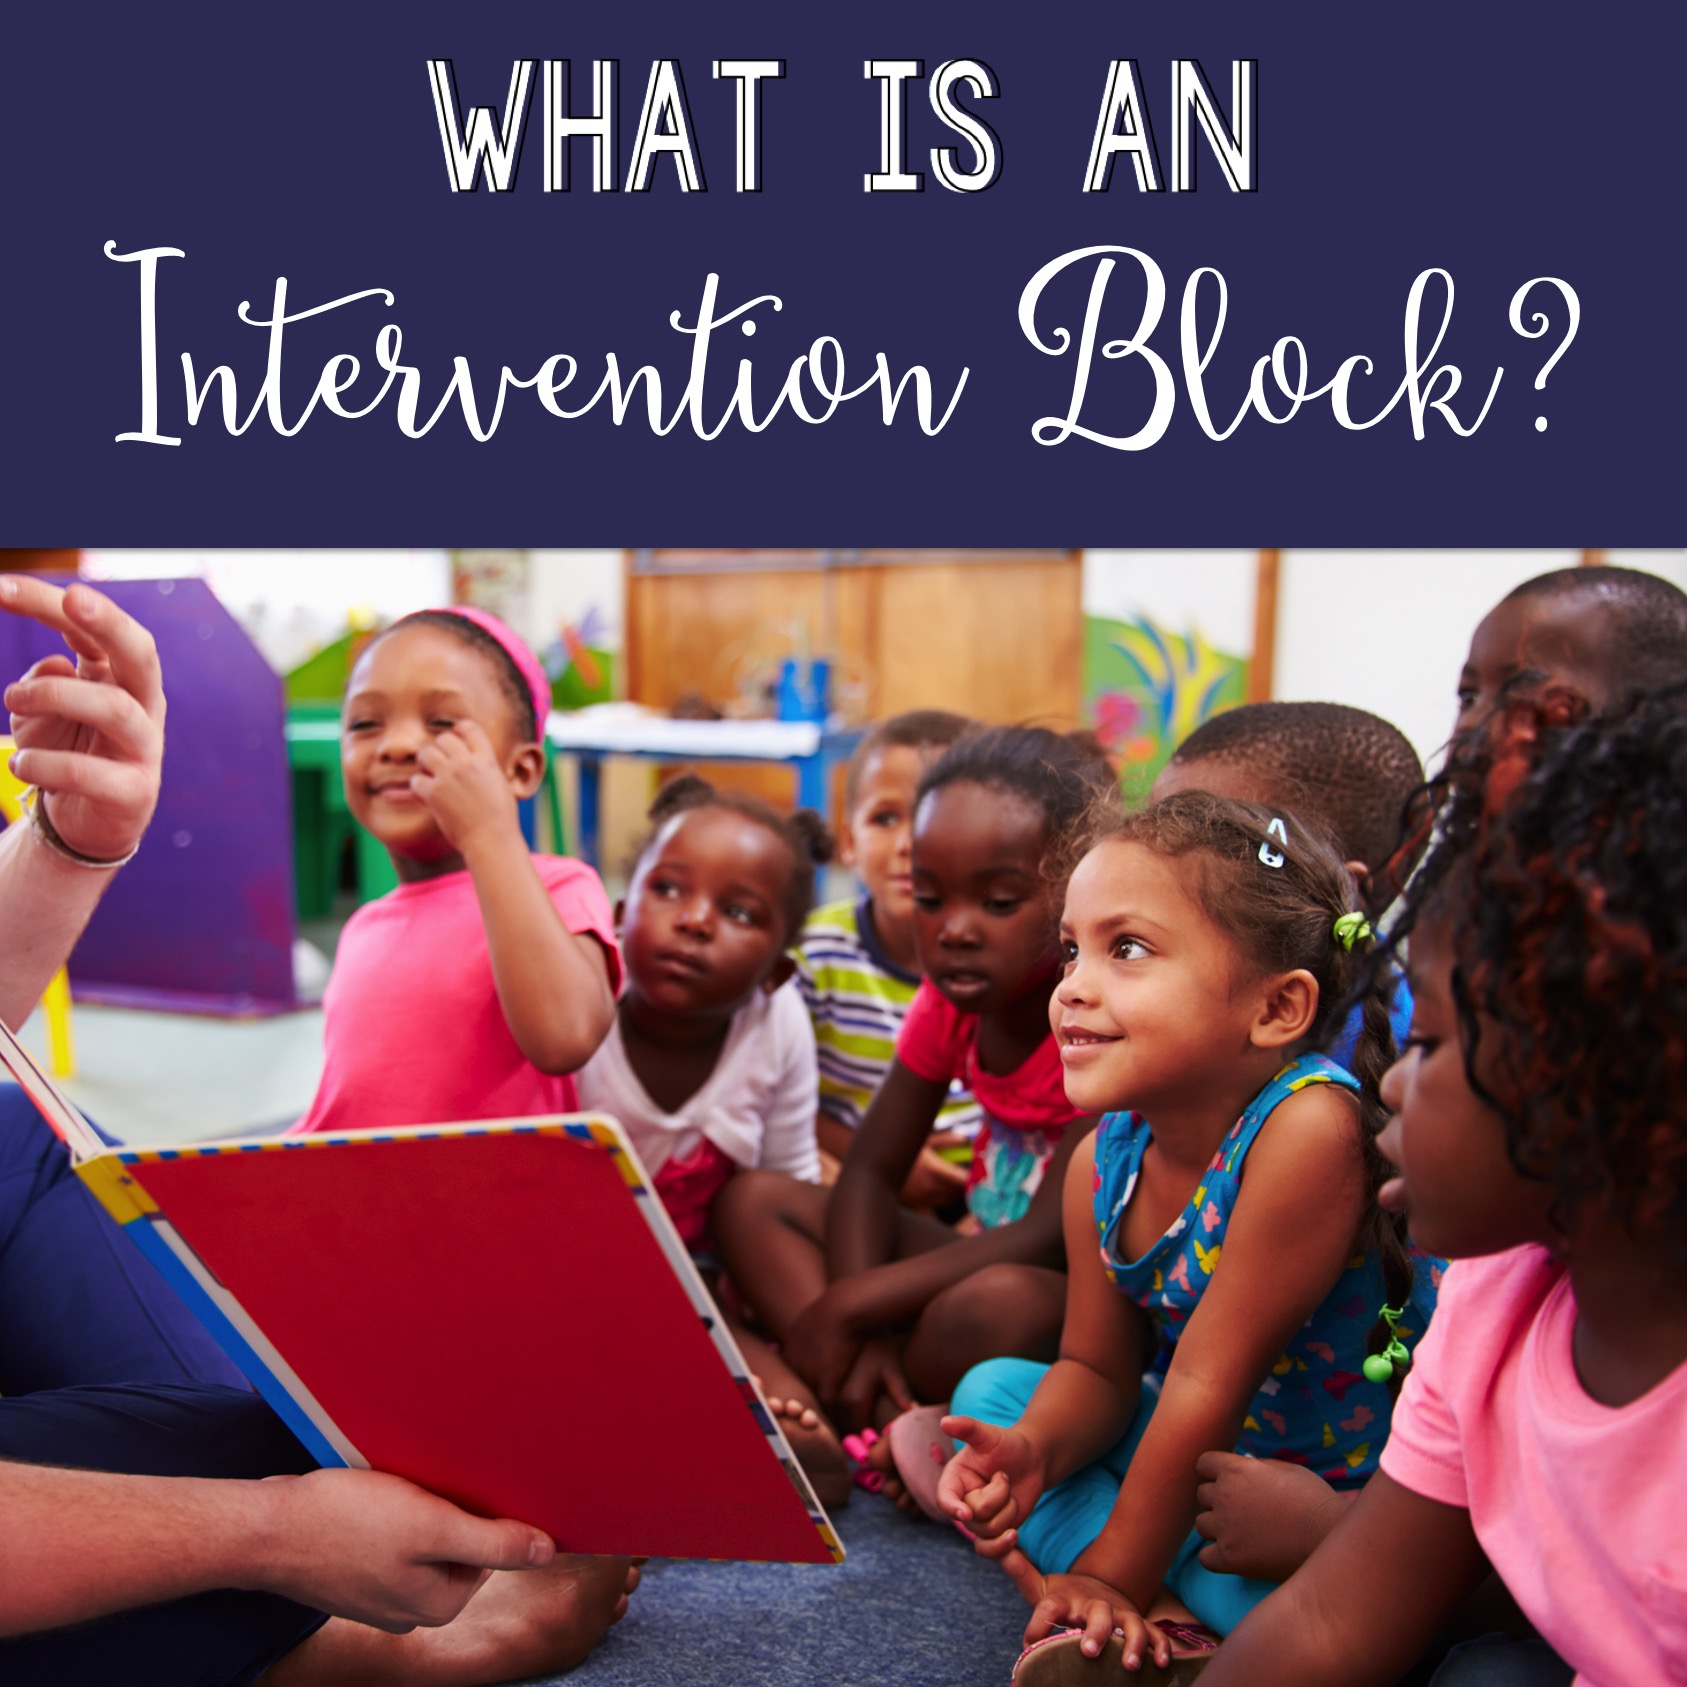 What is an intervention block? Serve your students and meet their needs by blocking off your schedule.